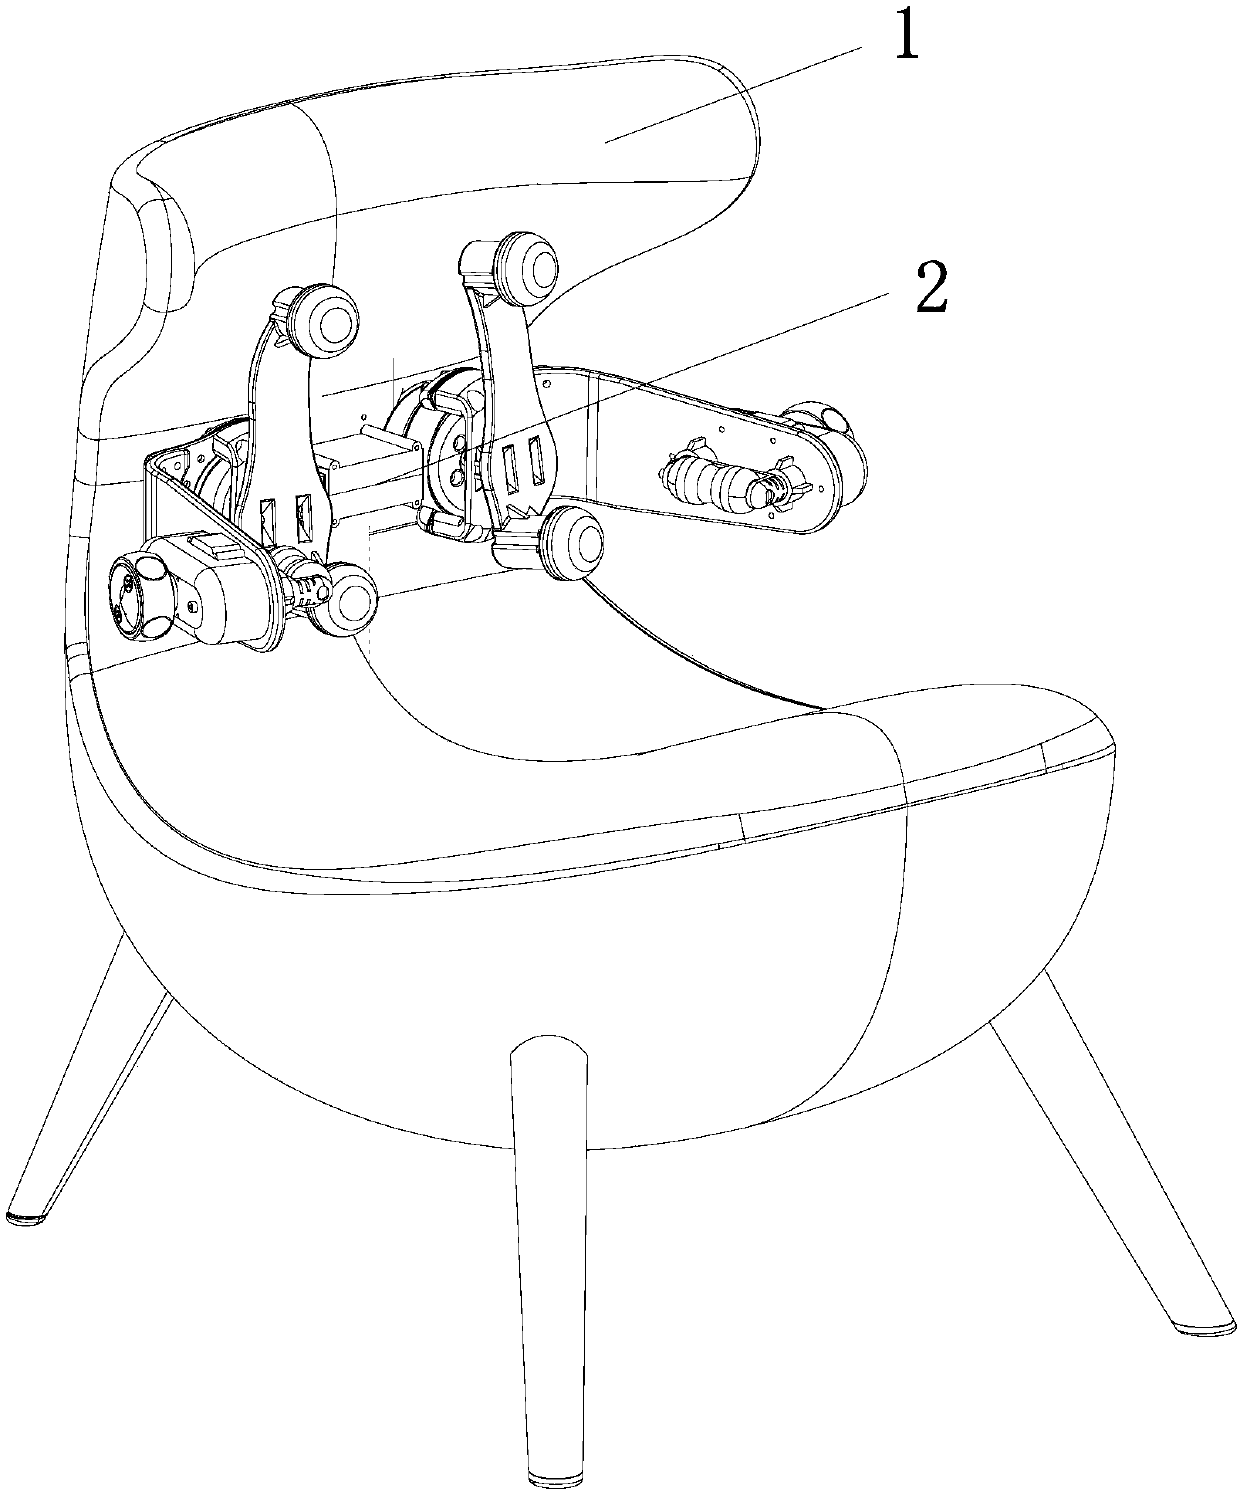 Seated weight reducing massage deVice